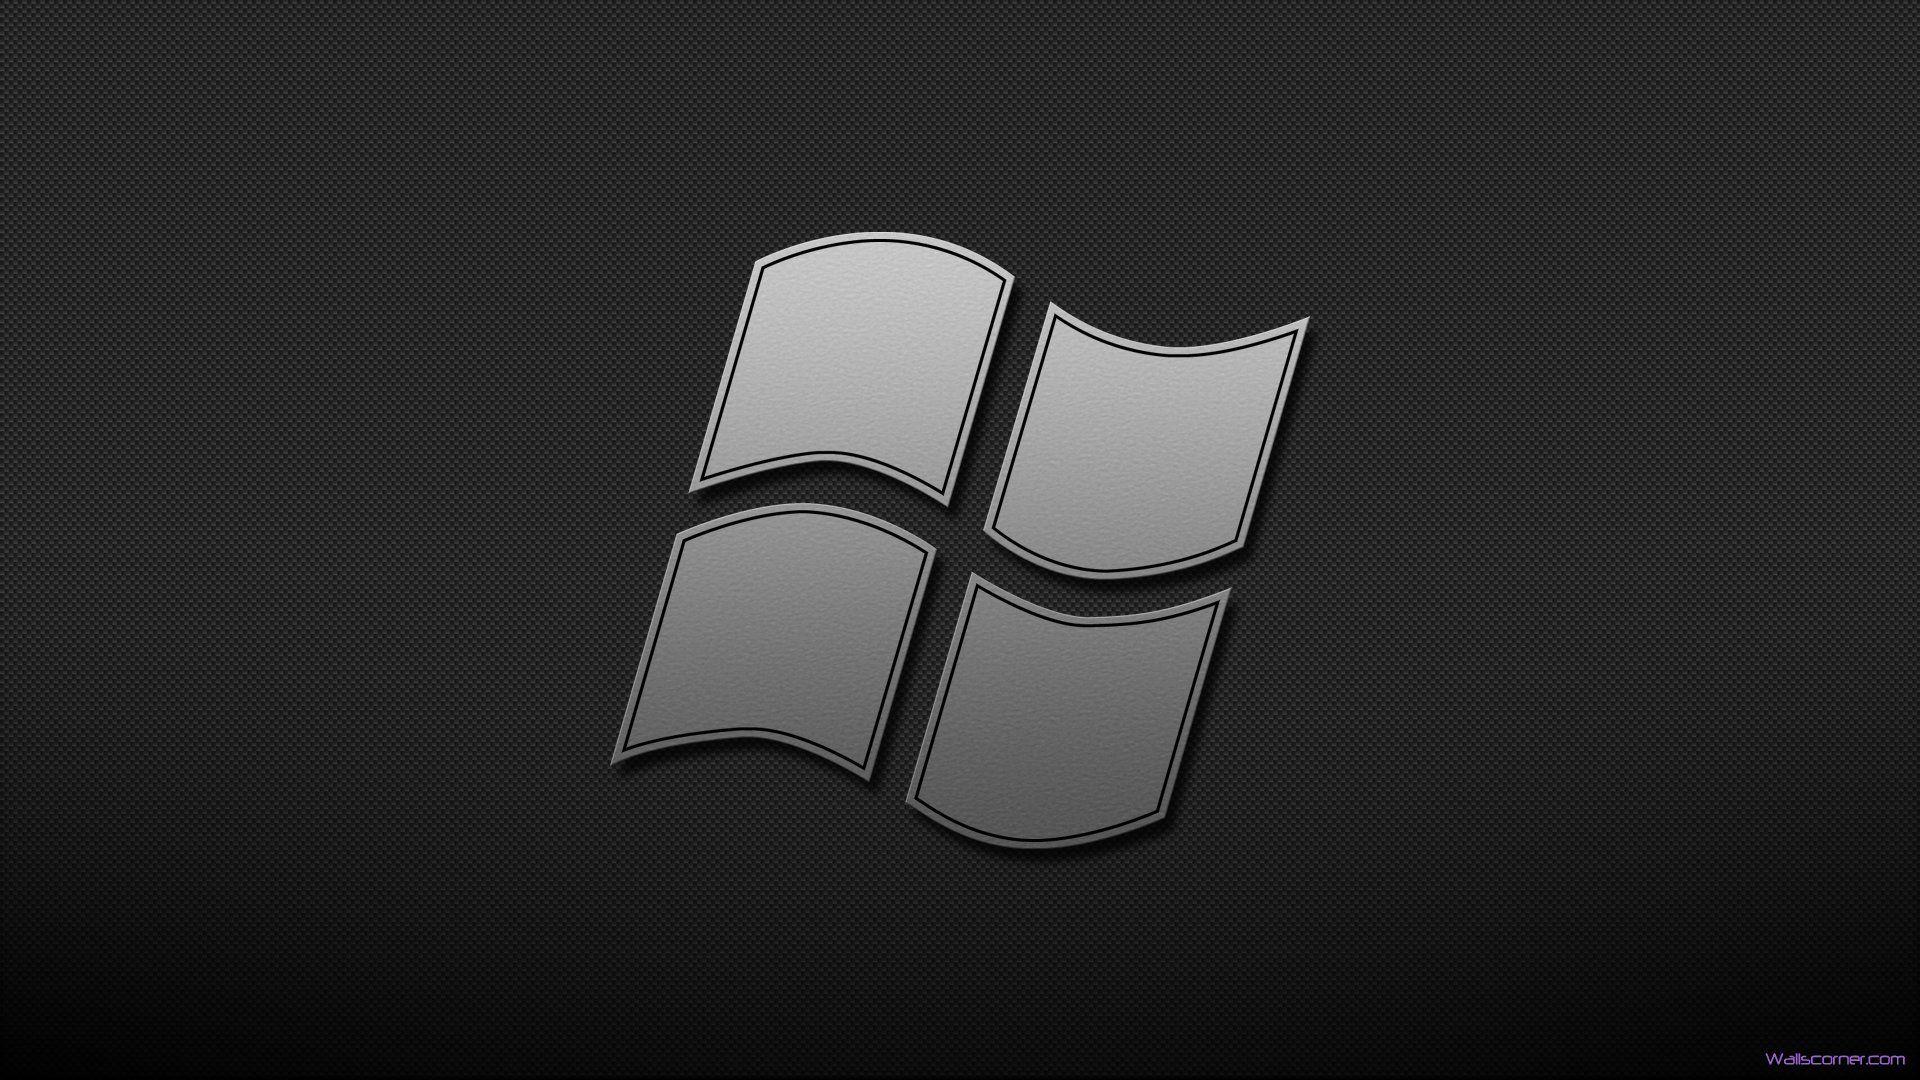 Image For > Windows Logo Wallpapers 1920x1080